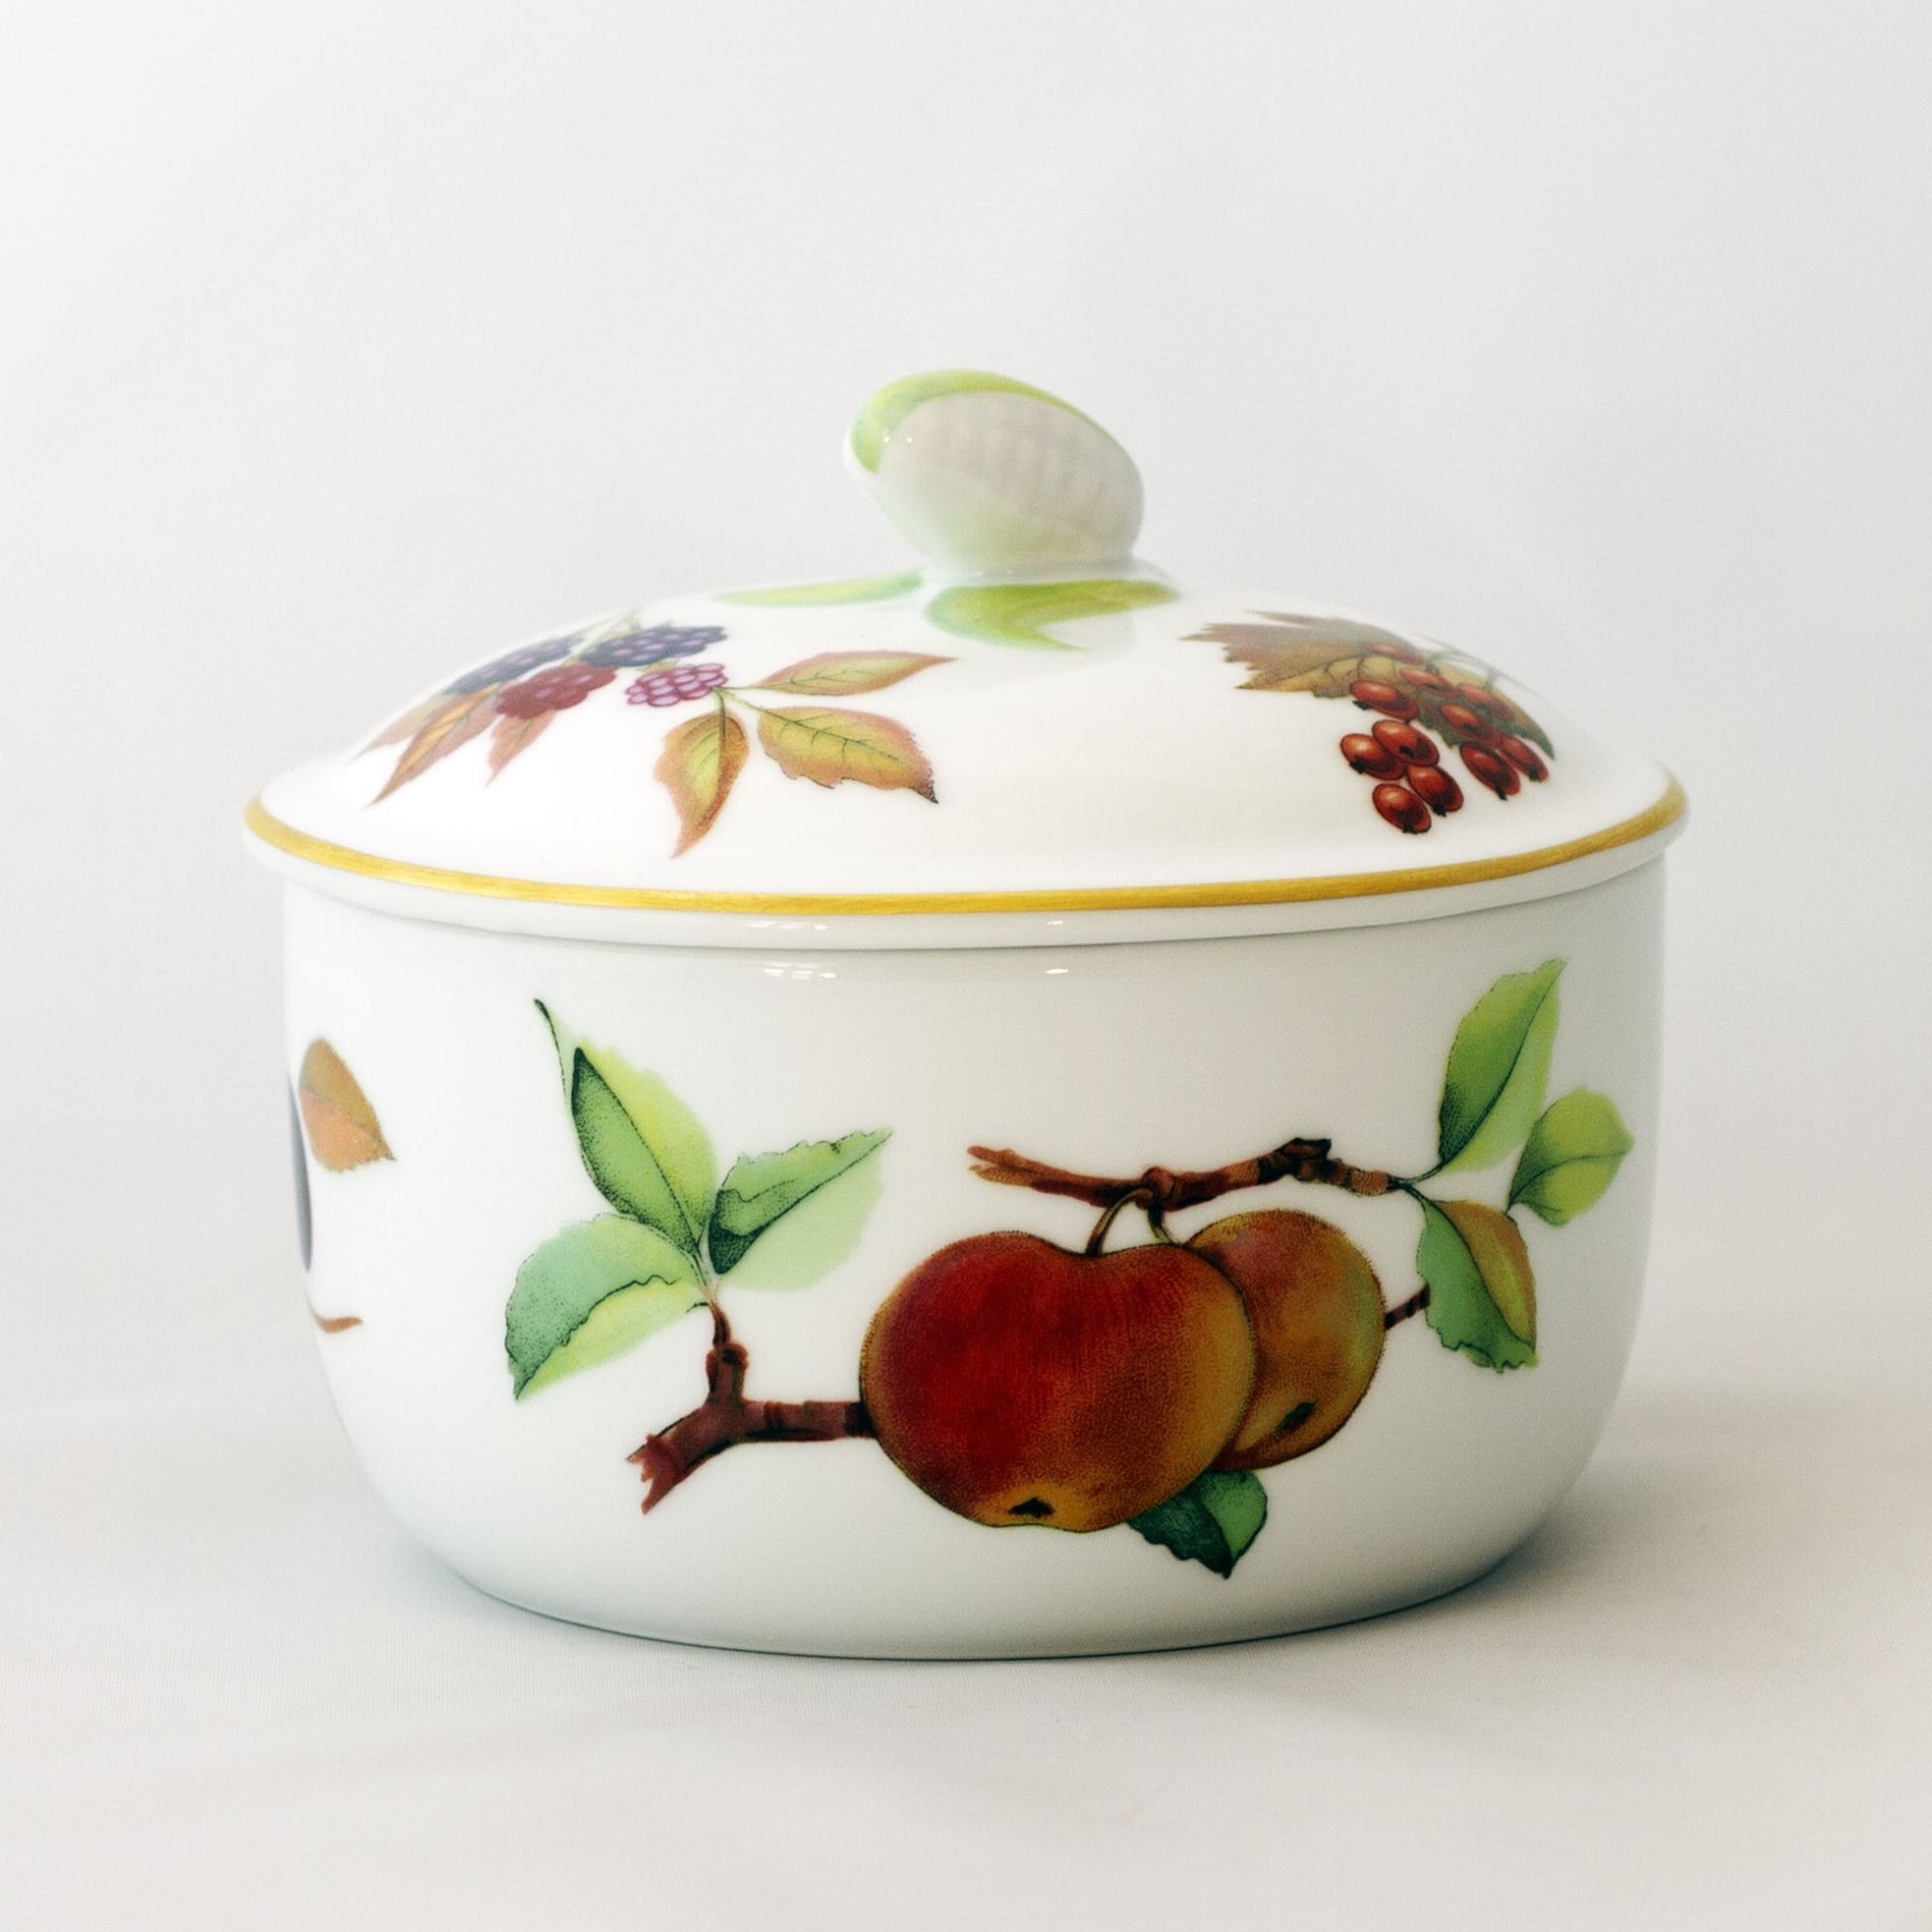 Royal WorcesterEVESHAM GOLD Porcelain Butter Tub with Lid with Fruit Sprays